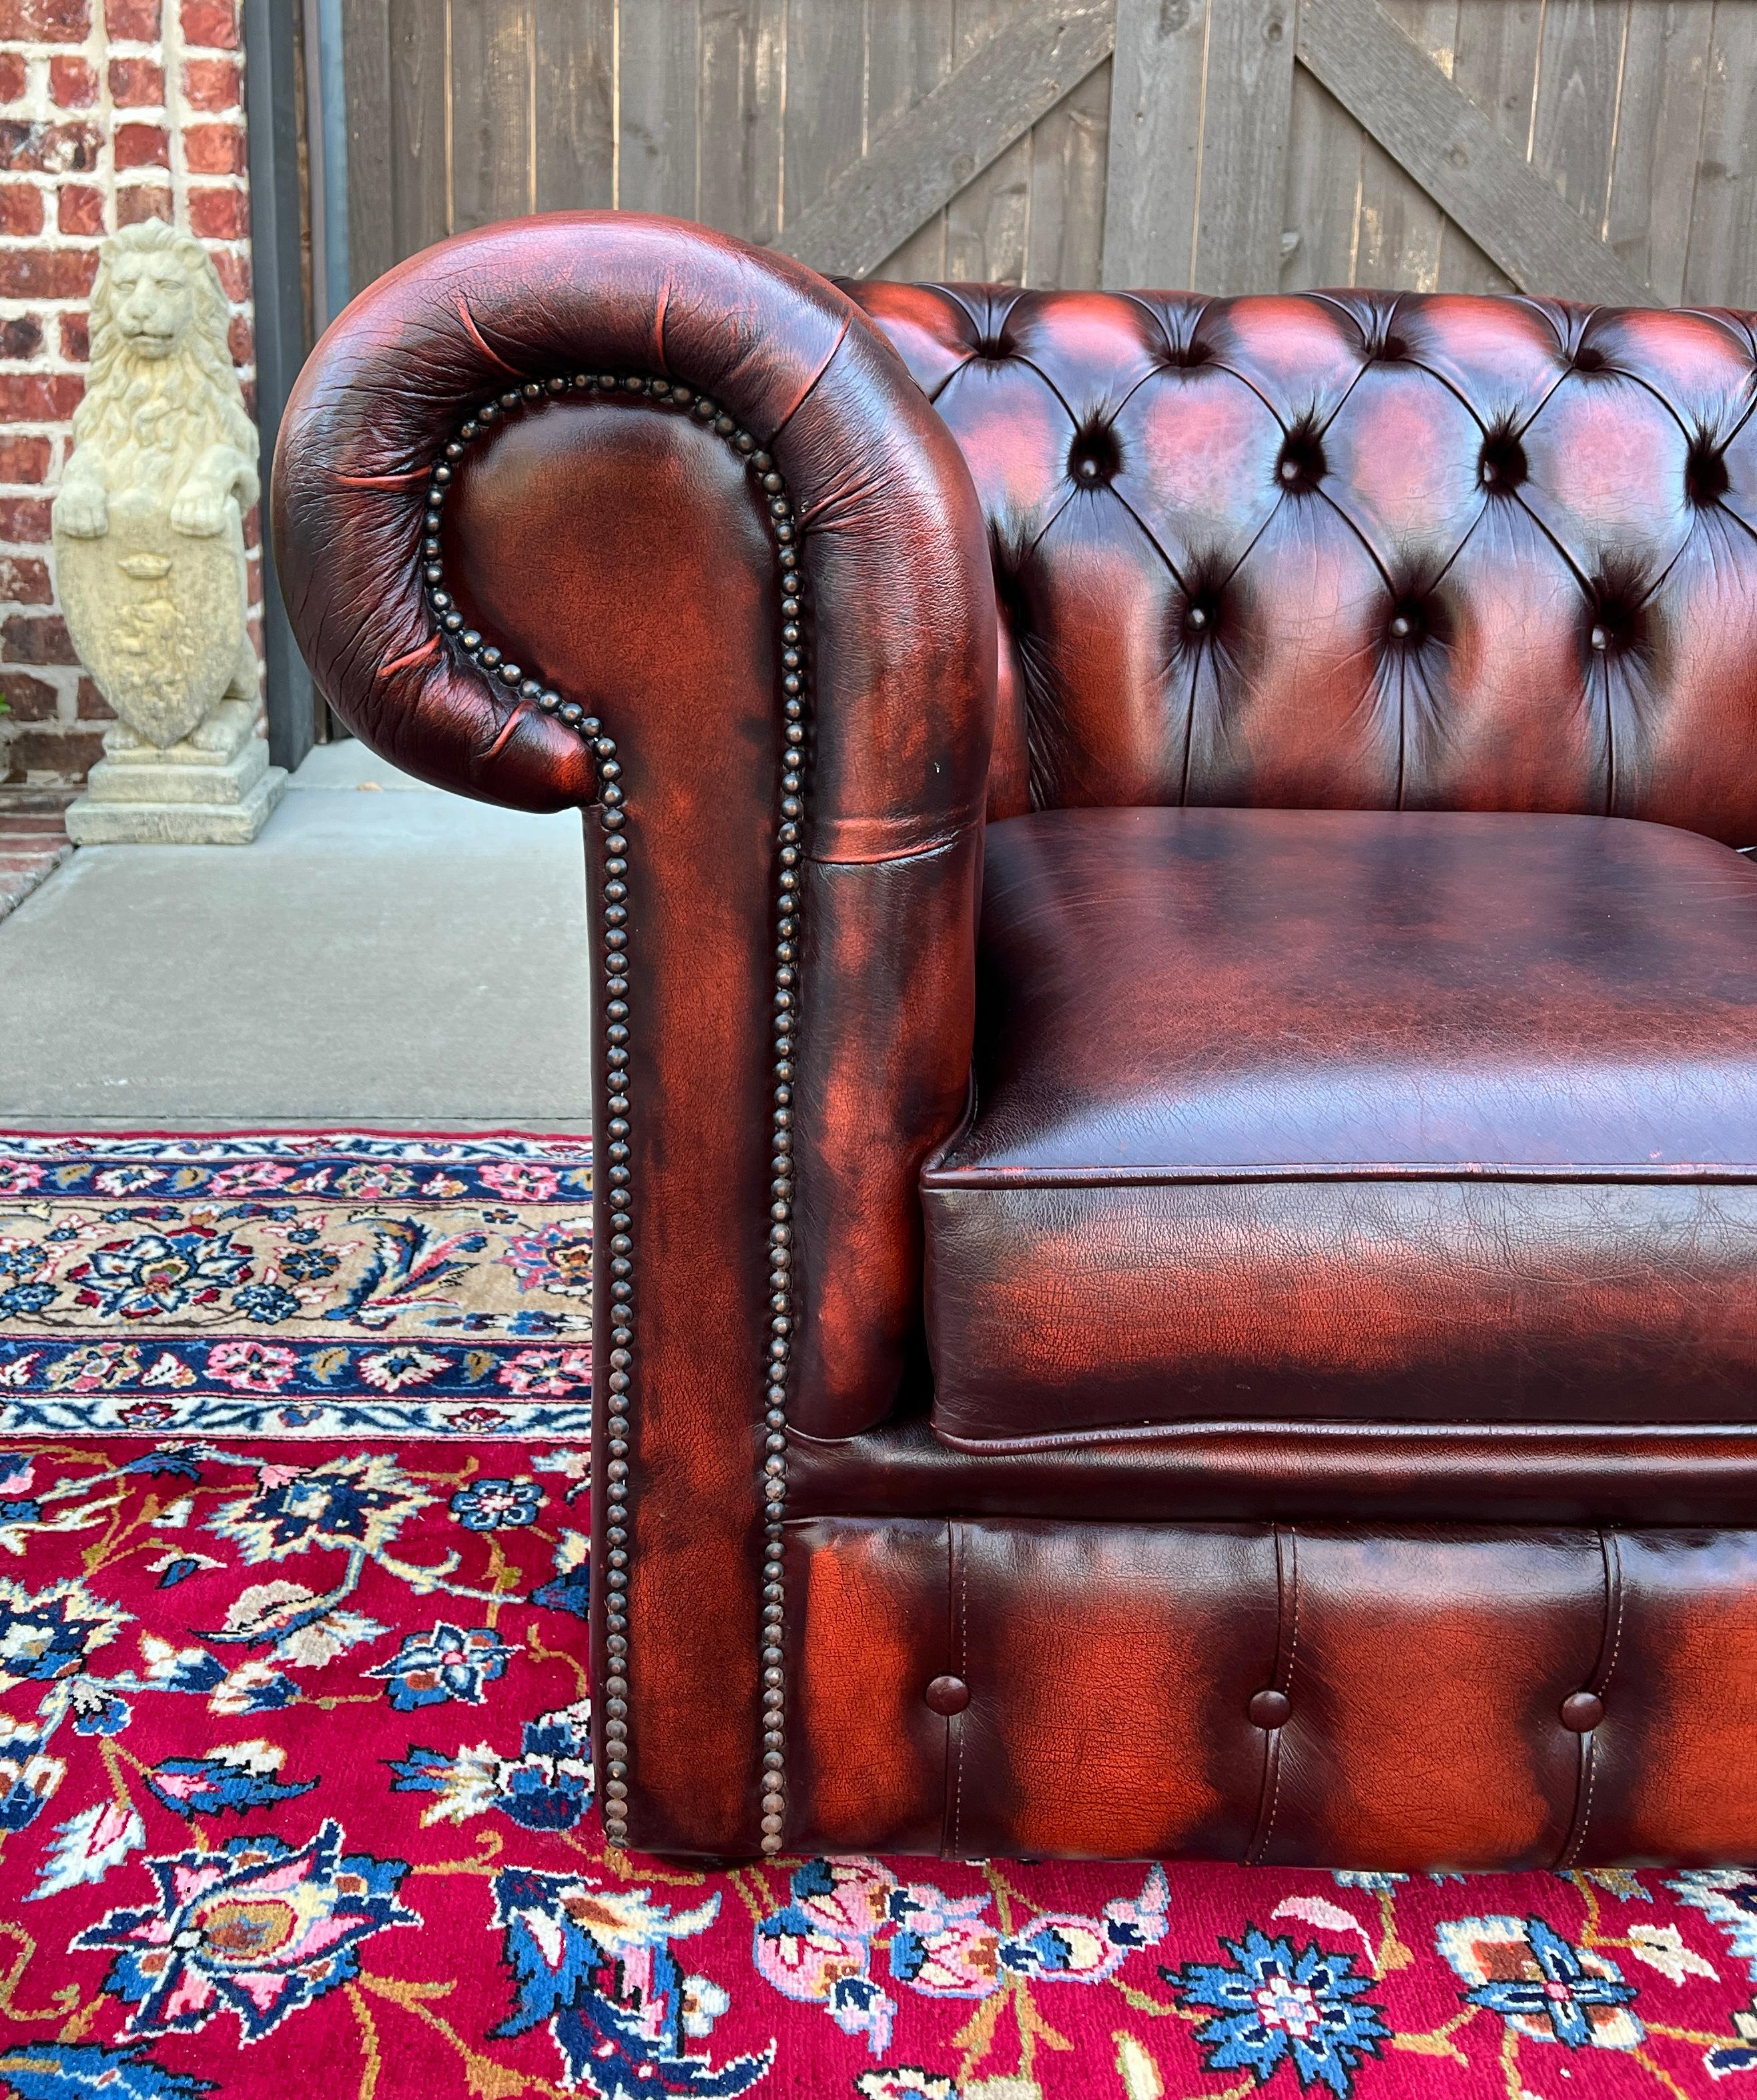 Vintage English Chesterfield Leather Tufted Love Seat Sofa Oxblood Red #1 For Sale 9